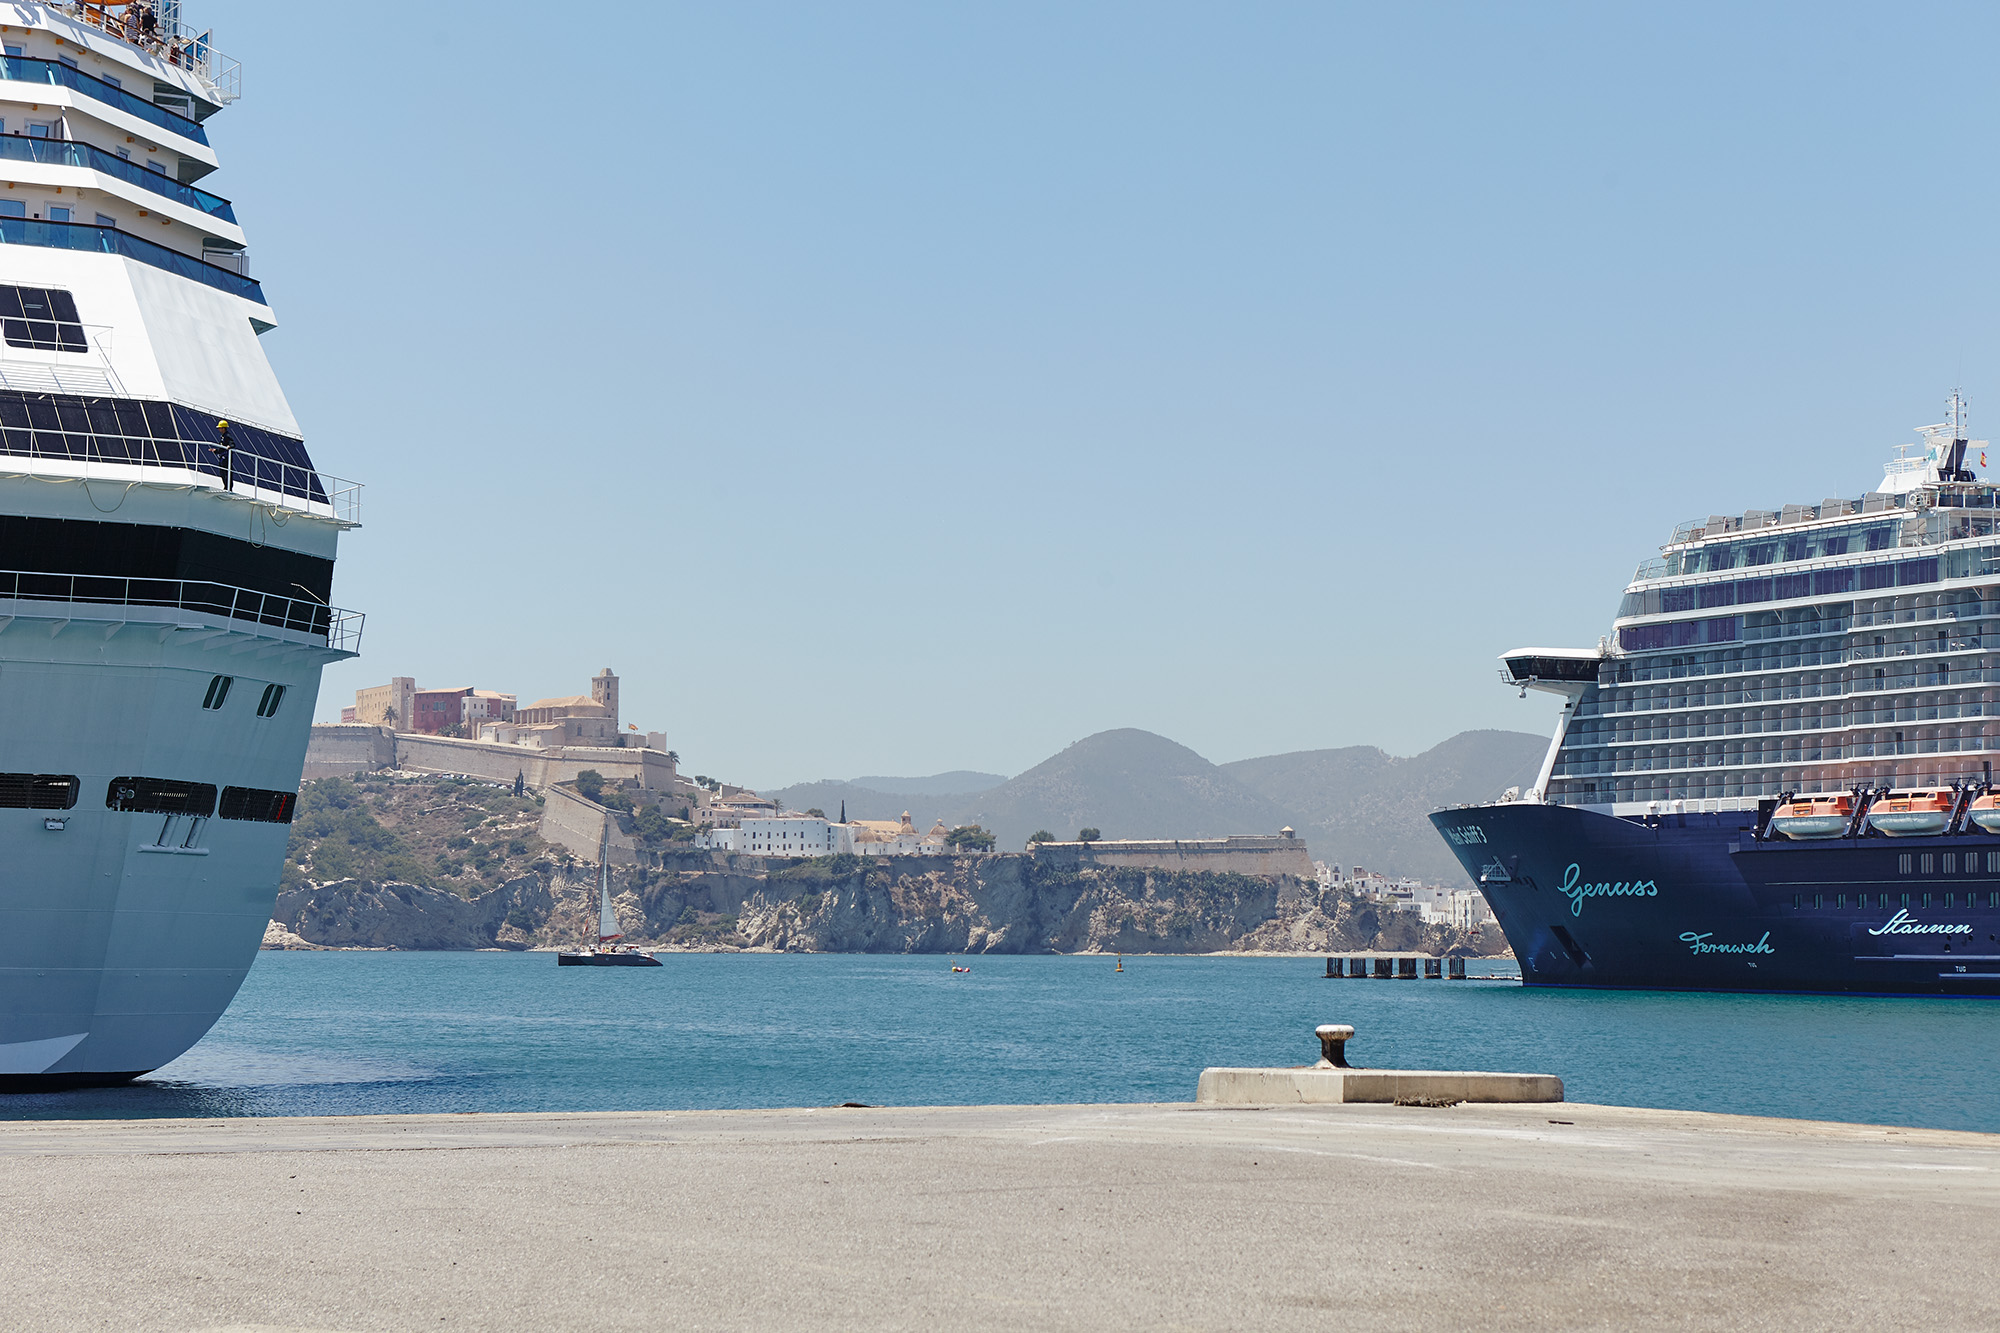 The APB anticipates a 34% increase in cruise ship stopovers at the port of Ibiza in 2017 